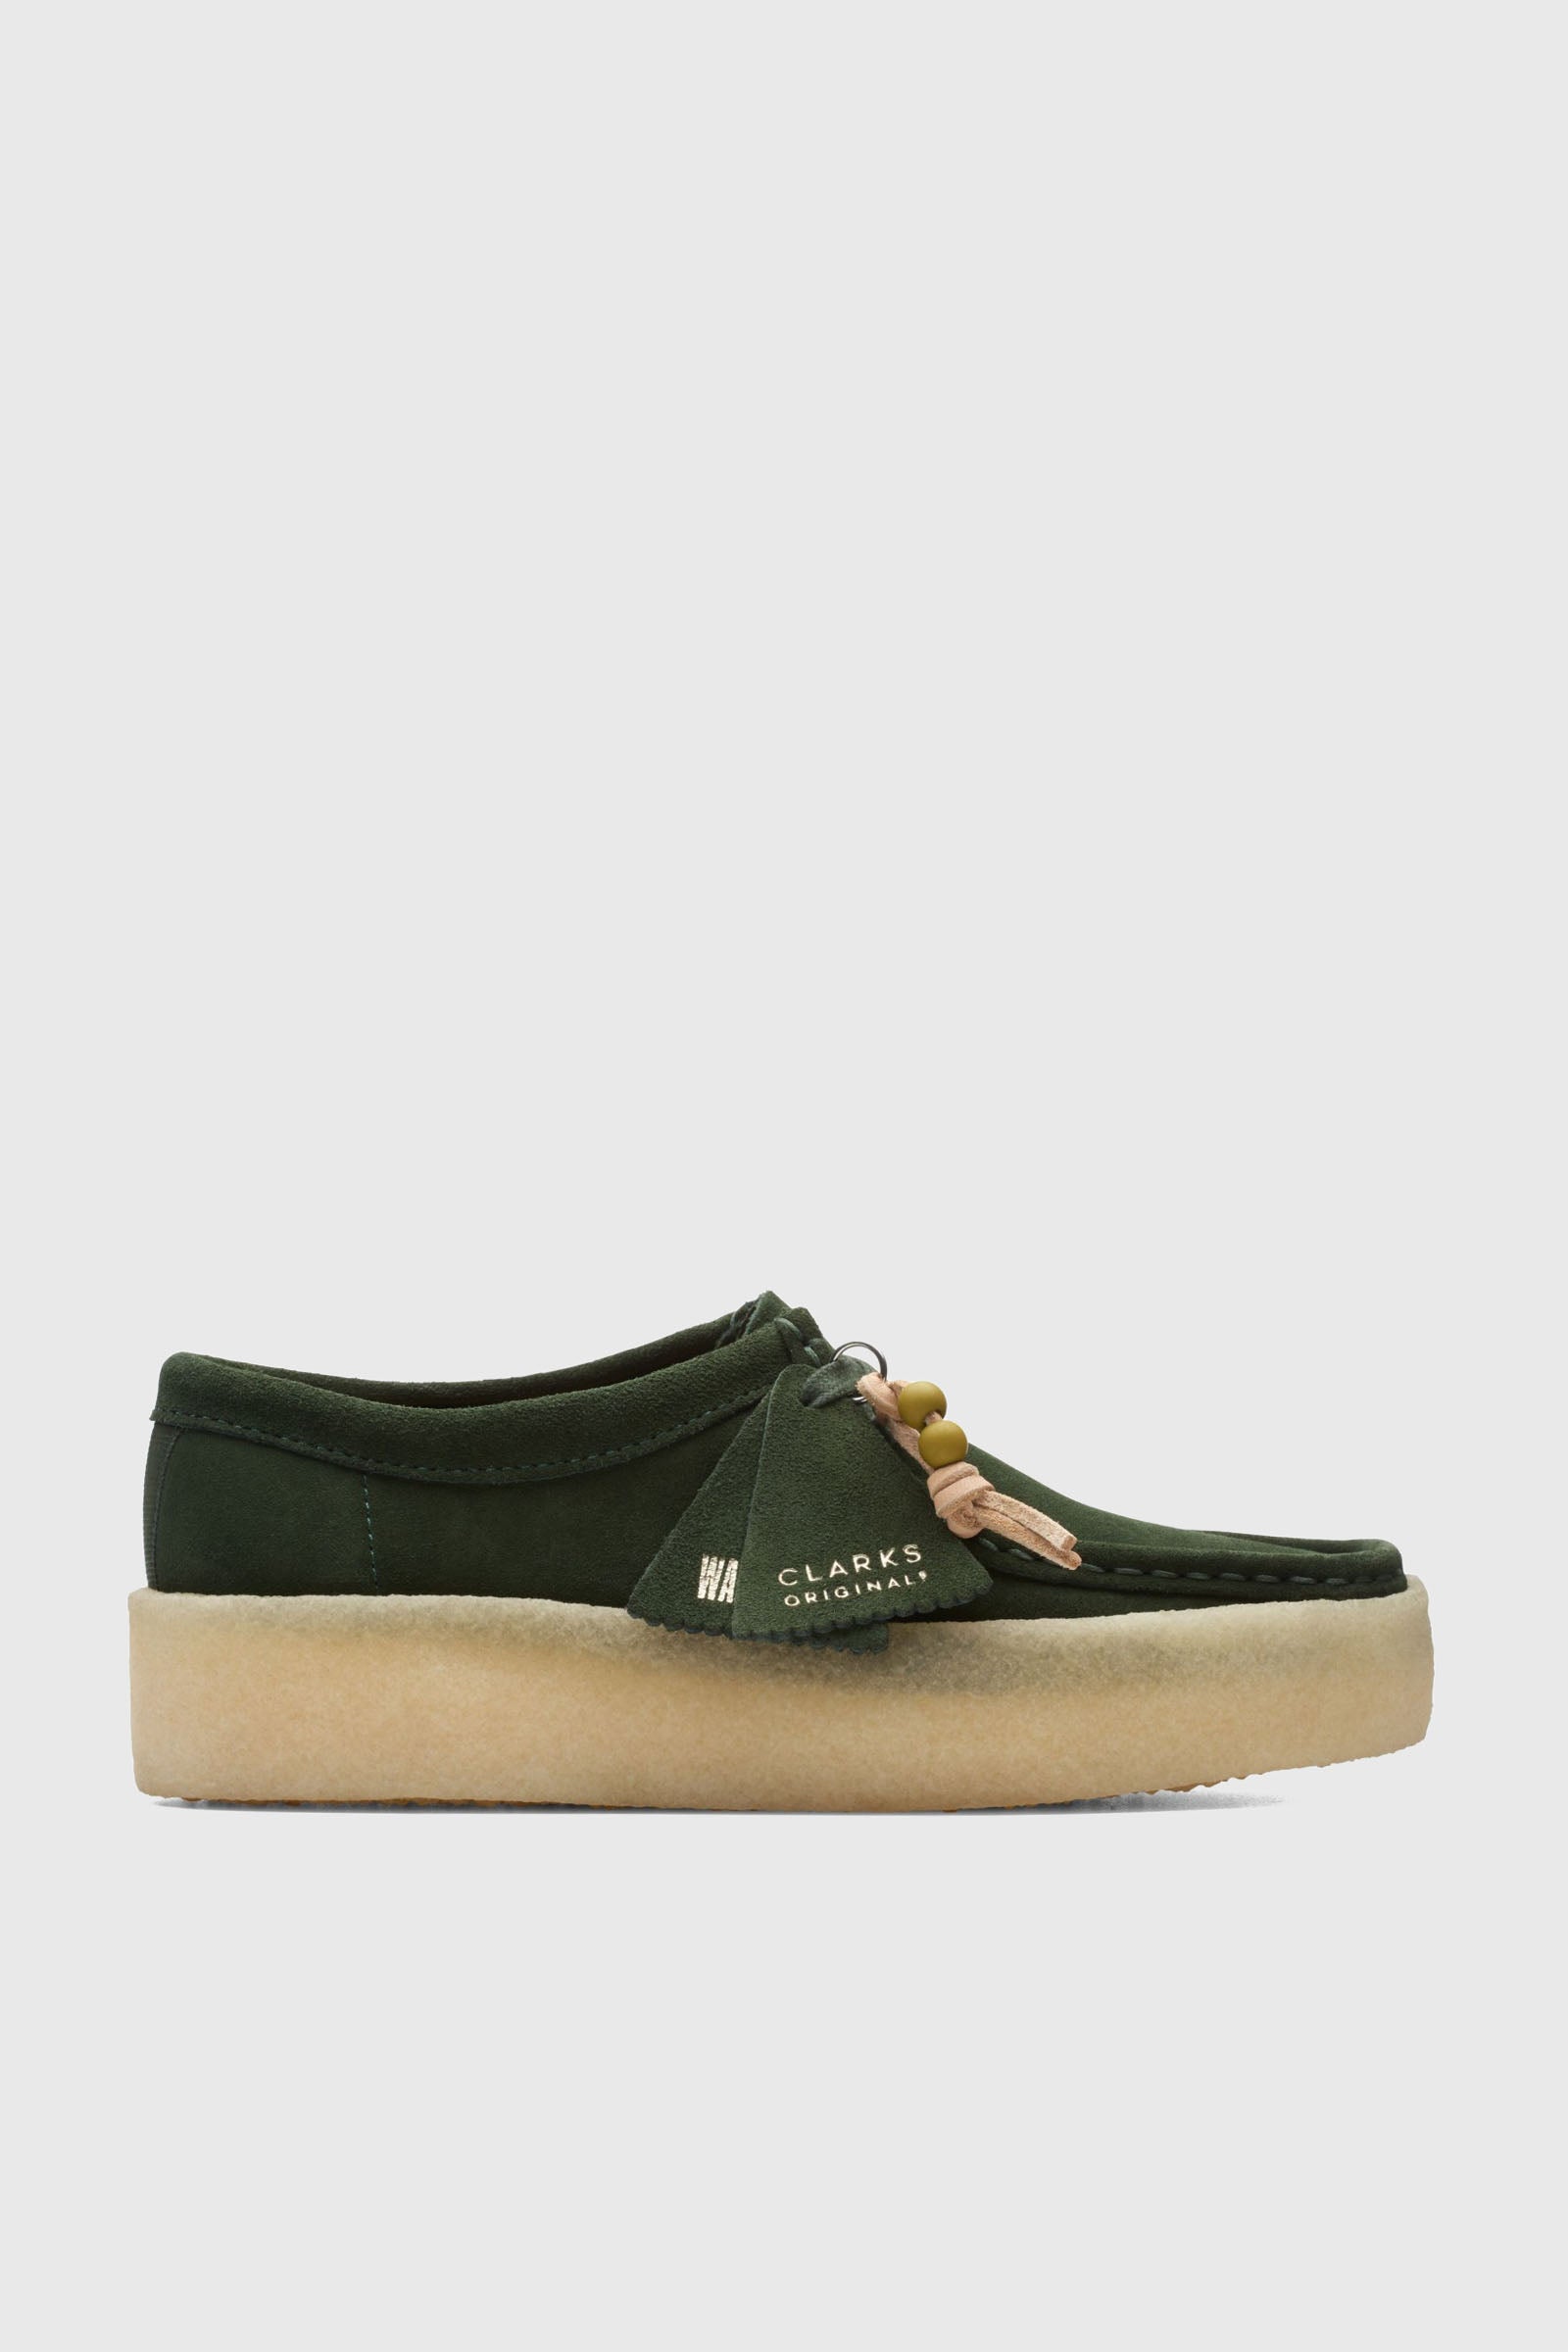 Clarks Wallabee Cup Leather Shoes in Dark Green/Dark Green - 1